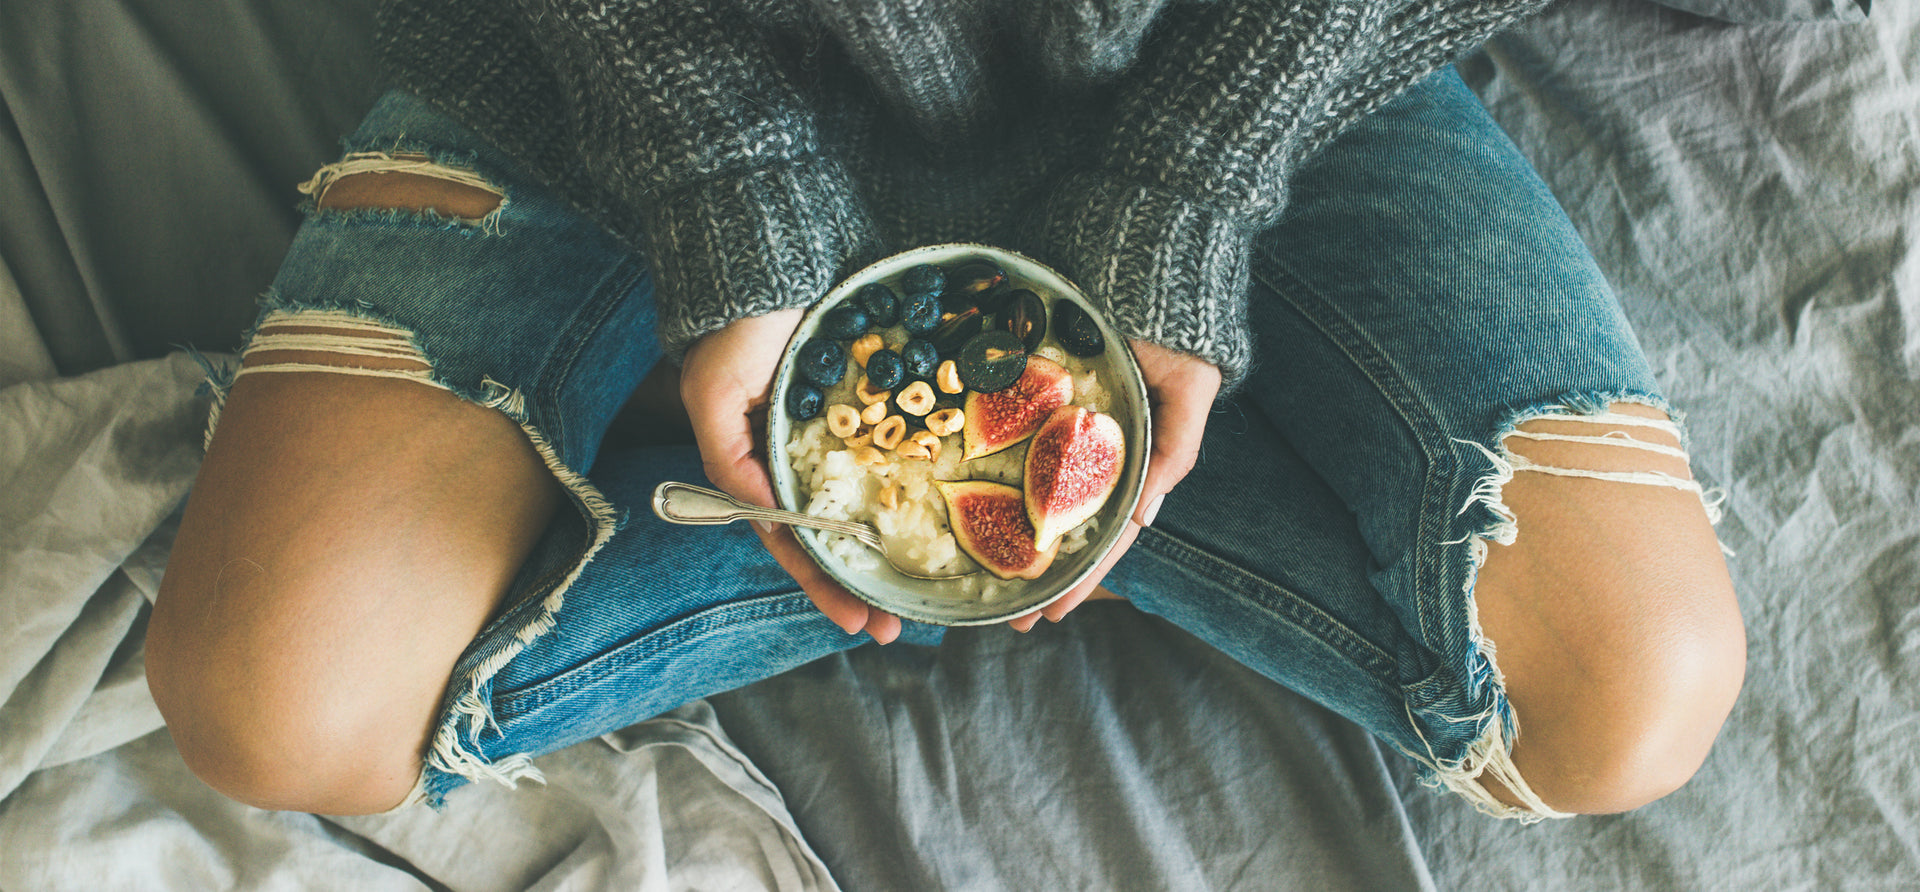 Postpartum tired woman in ribbed jeans holding a bowl of nutrient rich food